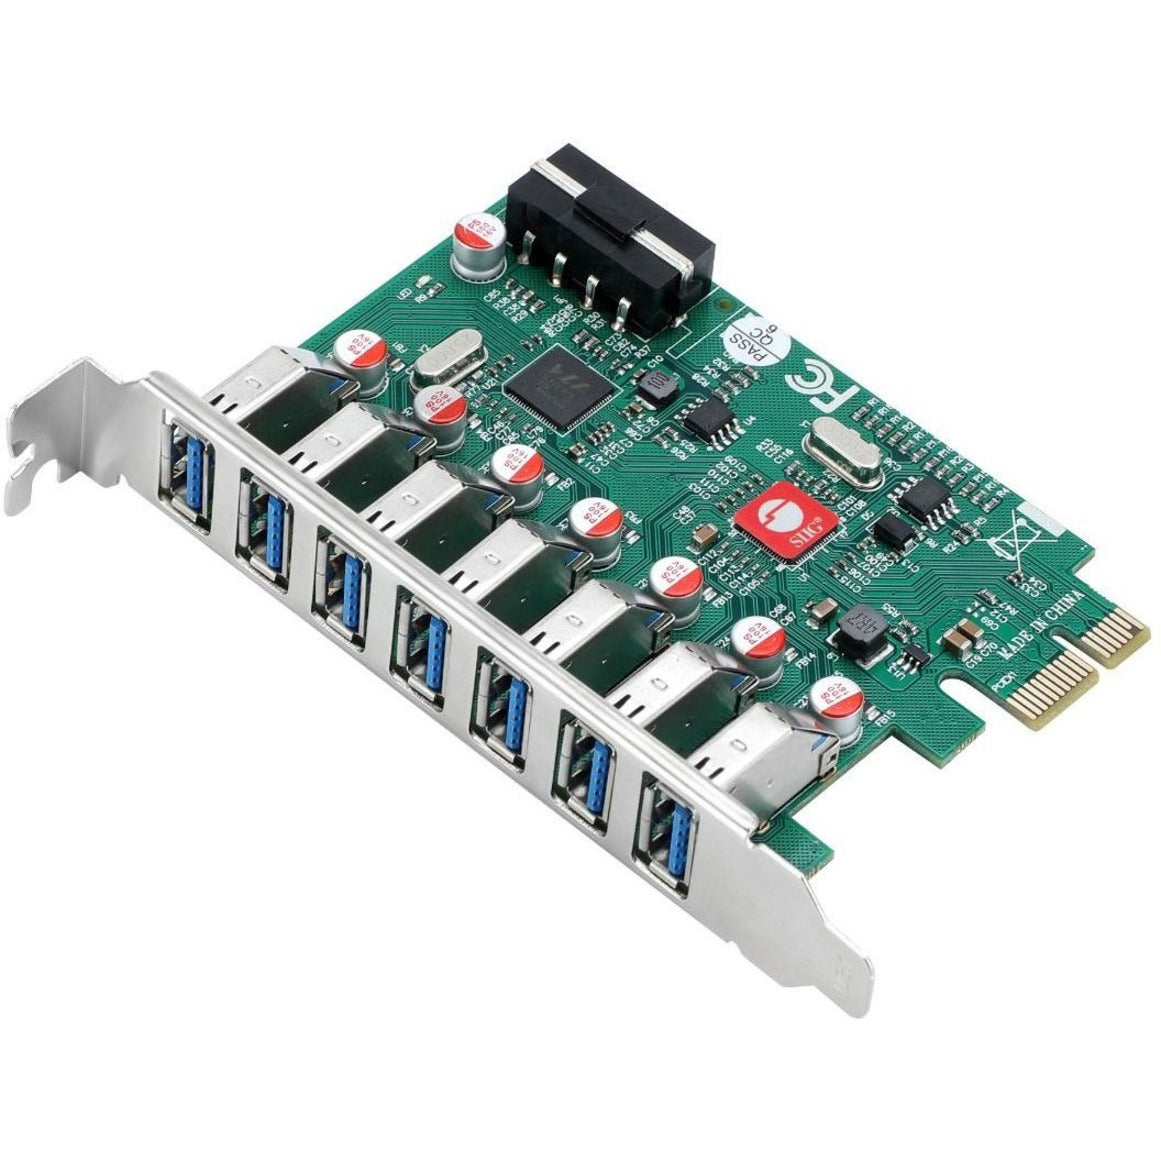 SIIG JU-P70211-S1 USB 3.0 7-Port PCIe Host Card, High-Speed Data Transfer and Easy Expansion